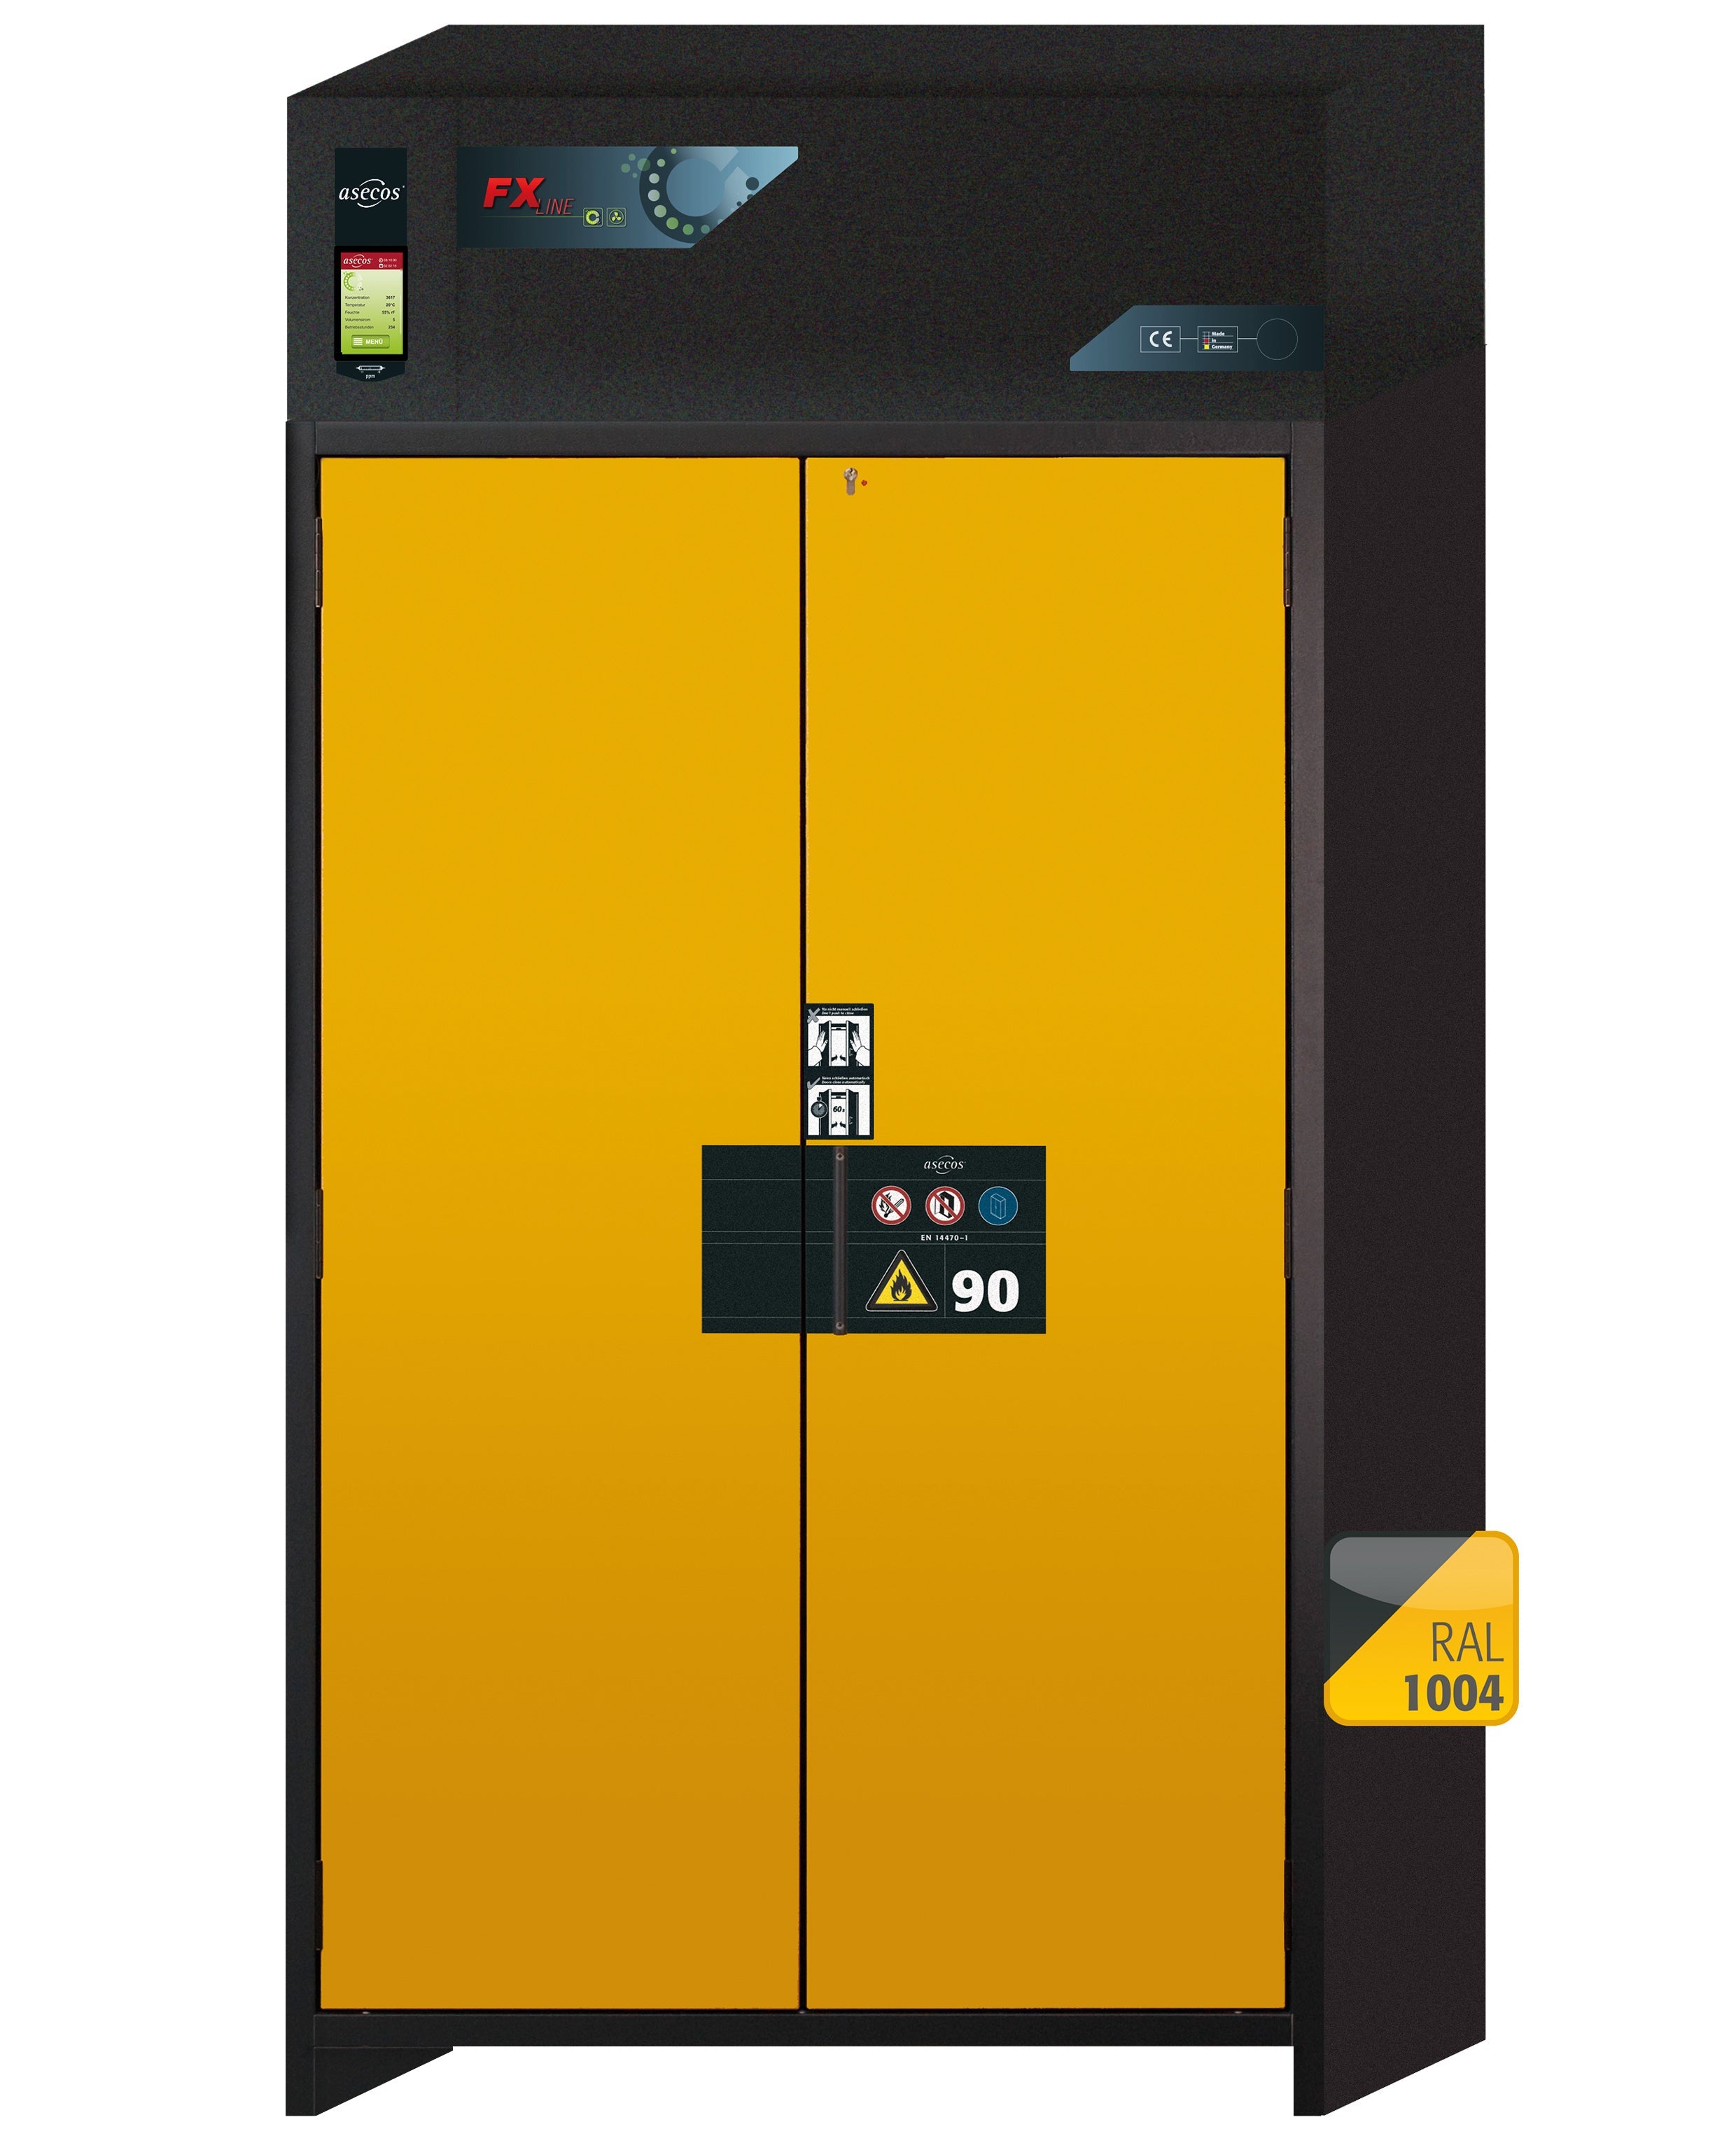 Type 90 recirculating air filter cabinet FX-PEGASUS-90 model FX90.229.120.WDAC in safety yellow RAL 1004 with 4x standard shelves (sheet steel)